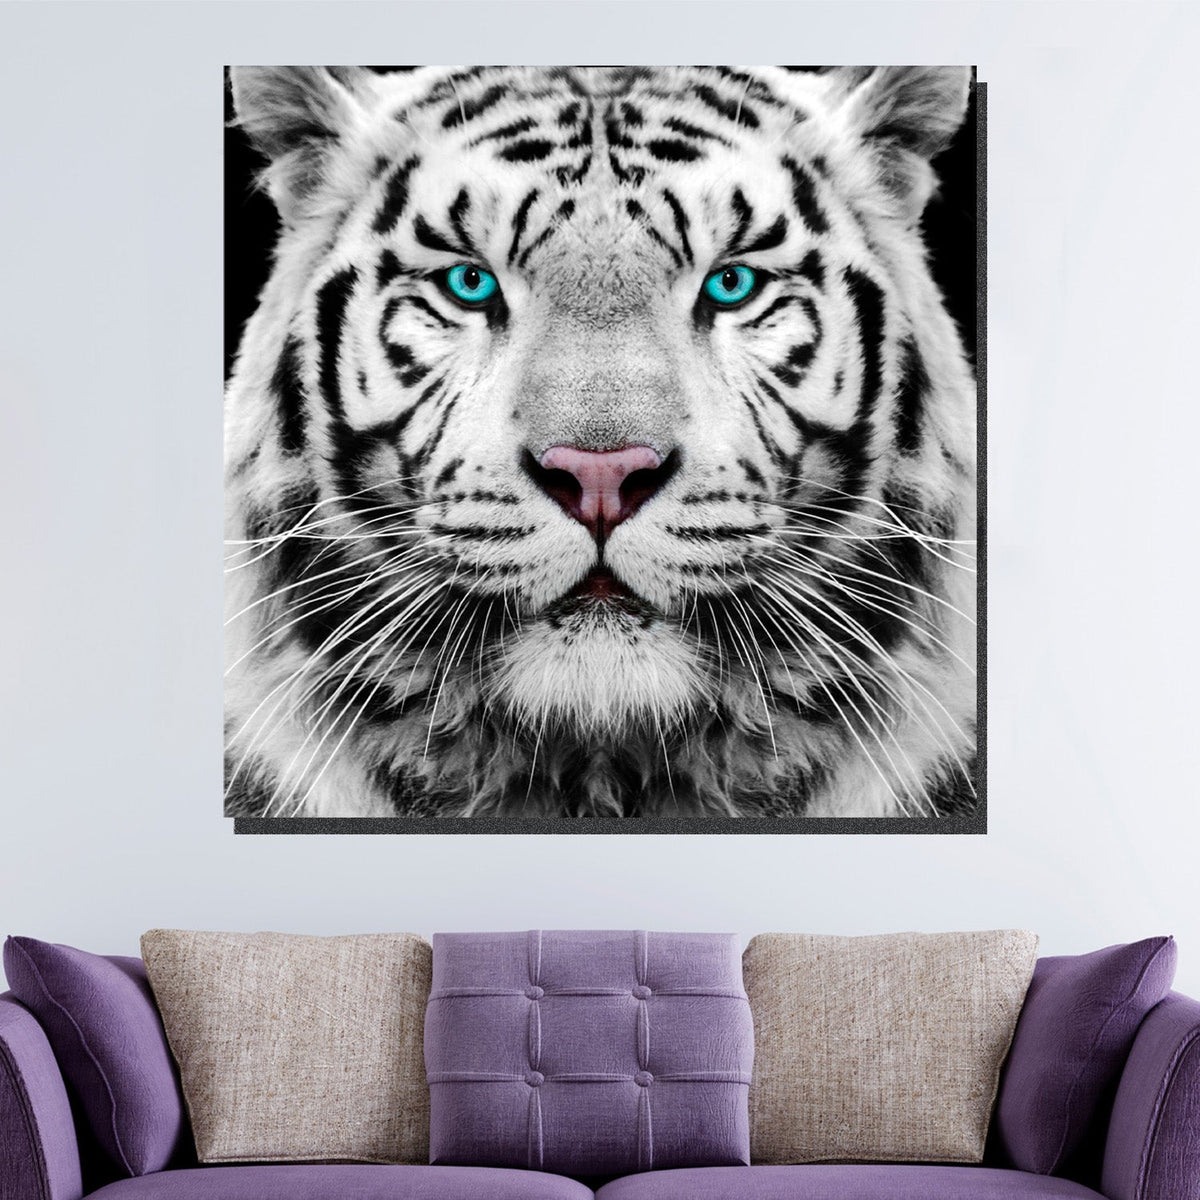 https://cdn.shopify.com/s/files/1/0387/9986/8044/products/SnowTigerCanvasArtprintStretched-2.jpg